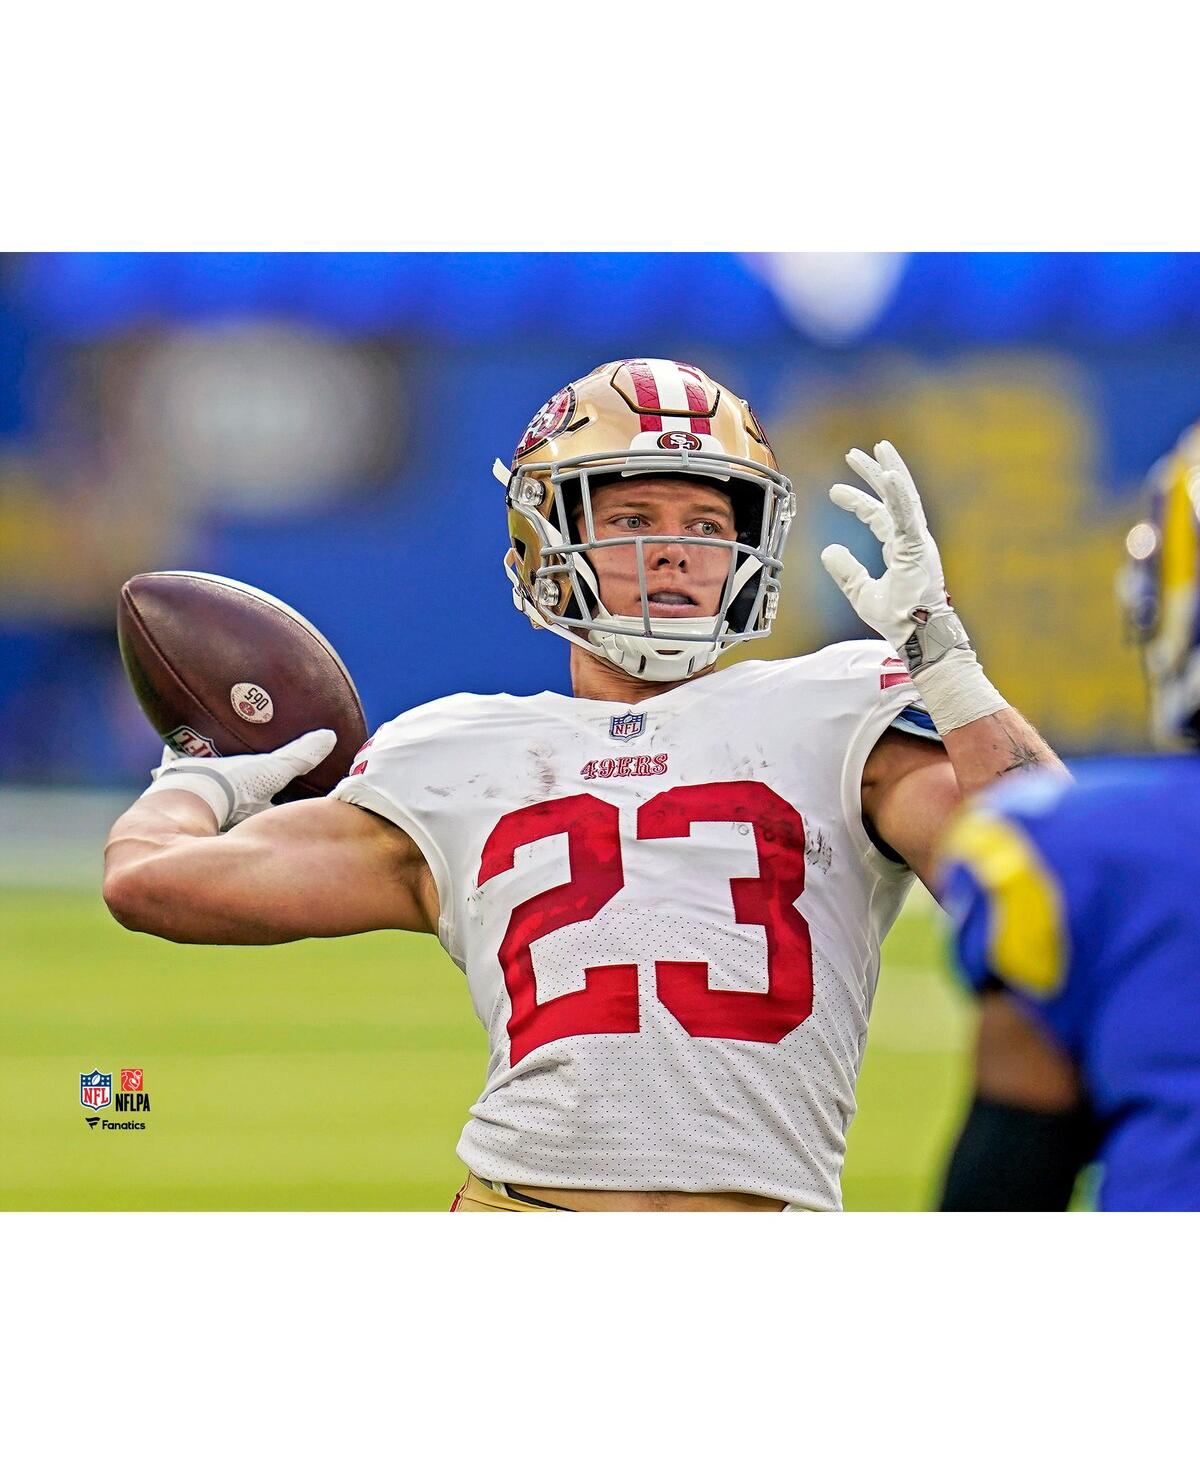 Fanatics Authentic Christian Mccaffrey San Francisco 49ers Unsigned Throws For A Touchdown Photograph In Multi